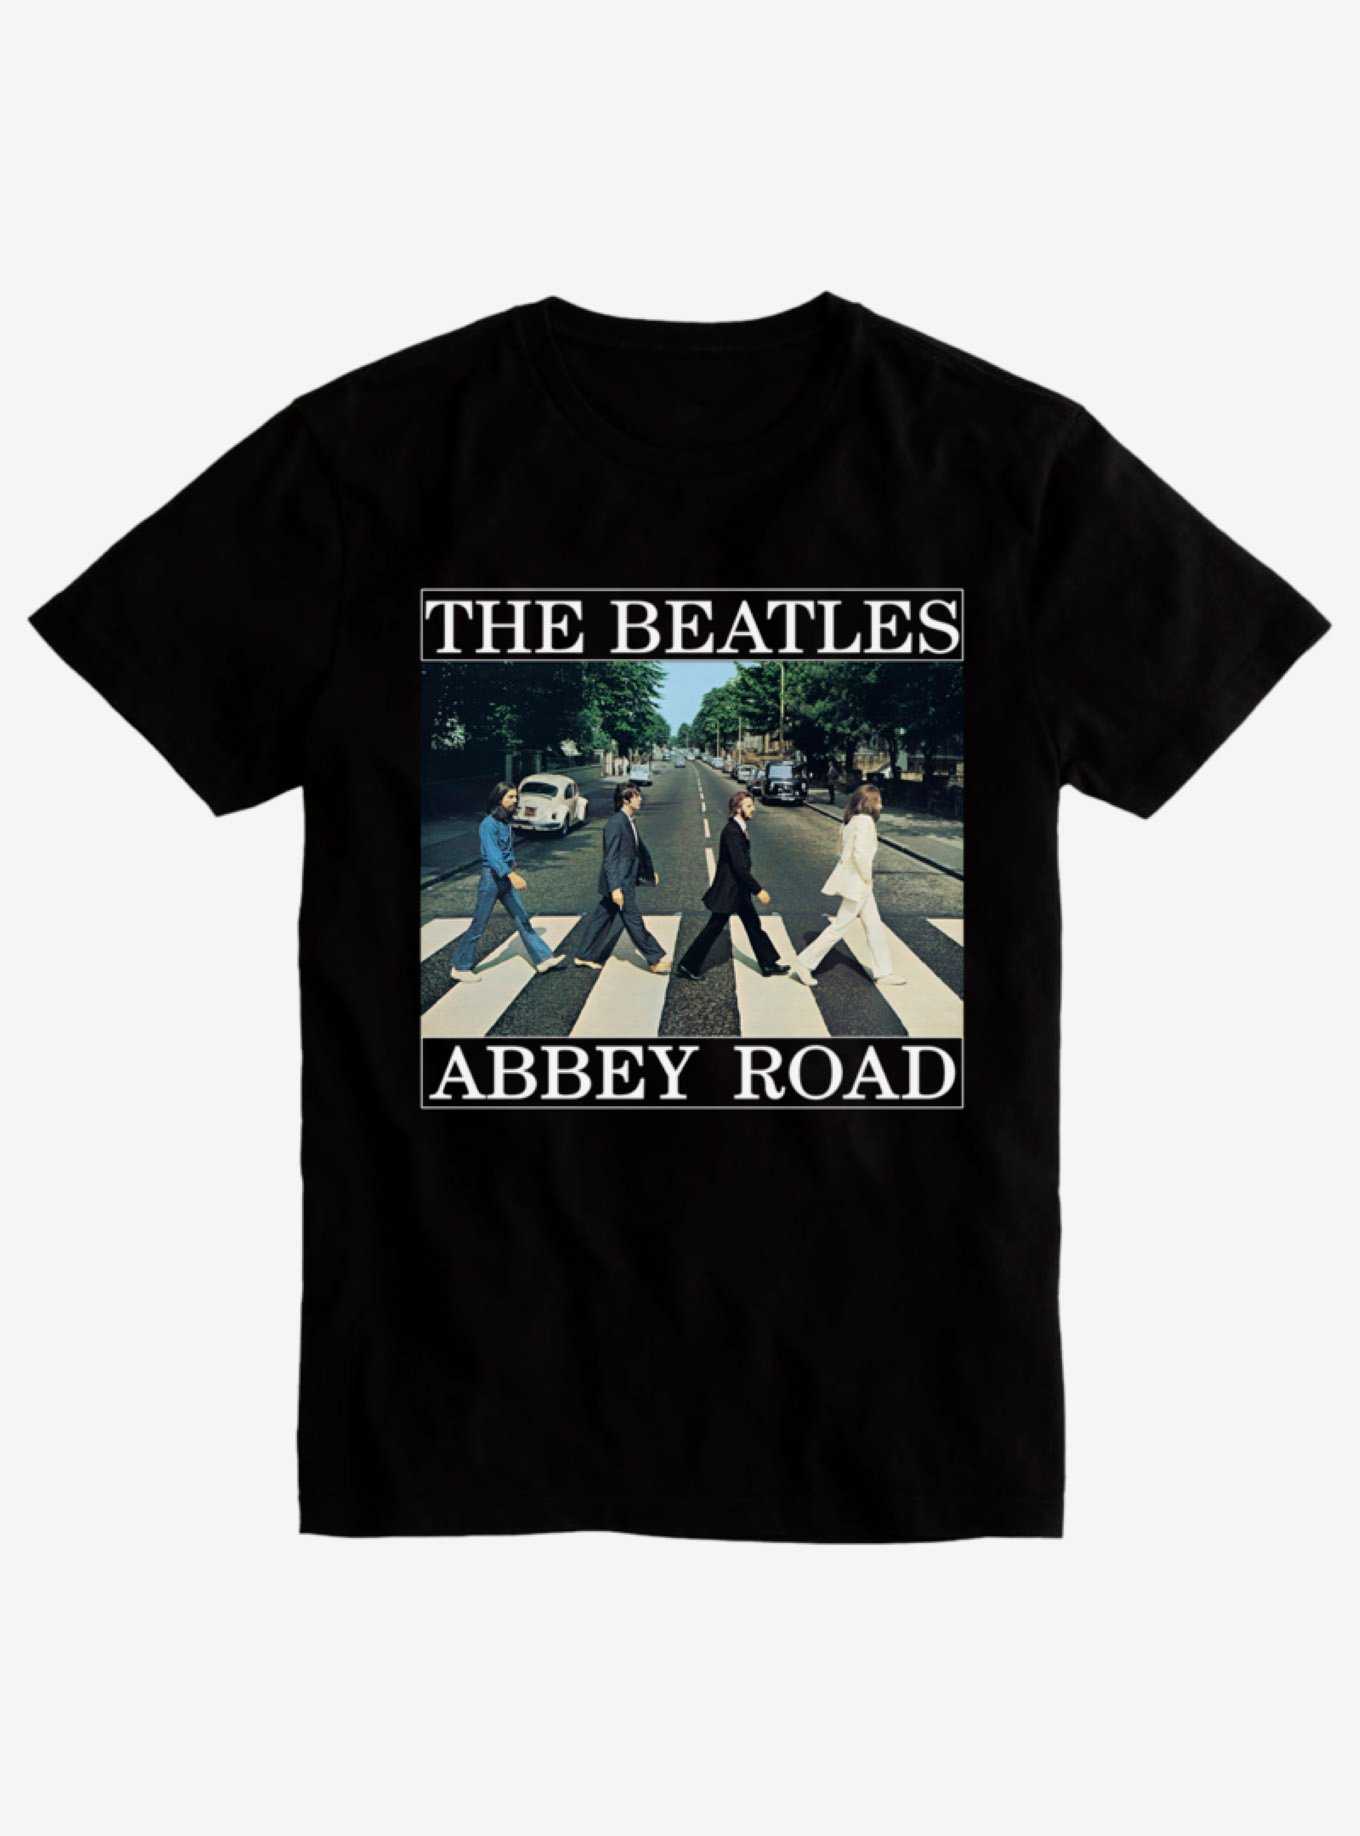 The Beatles Abbey Road Album Cover T-Shirt | Hot Topic